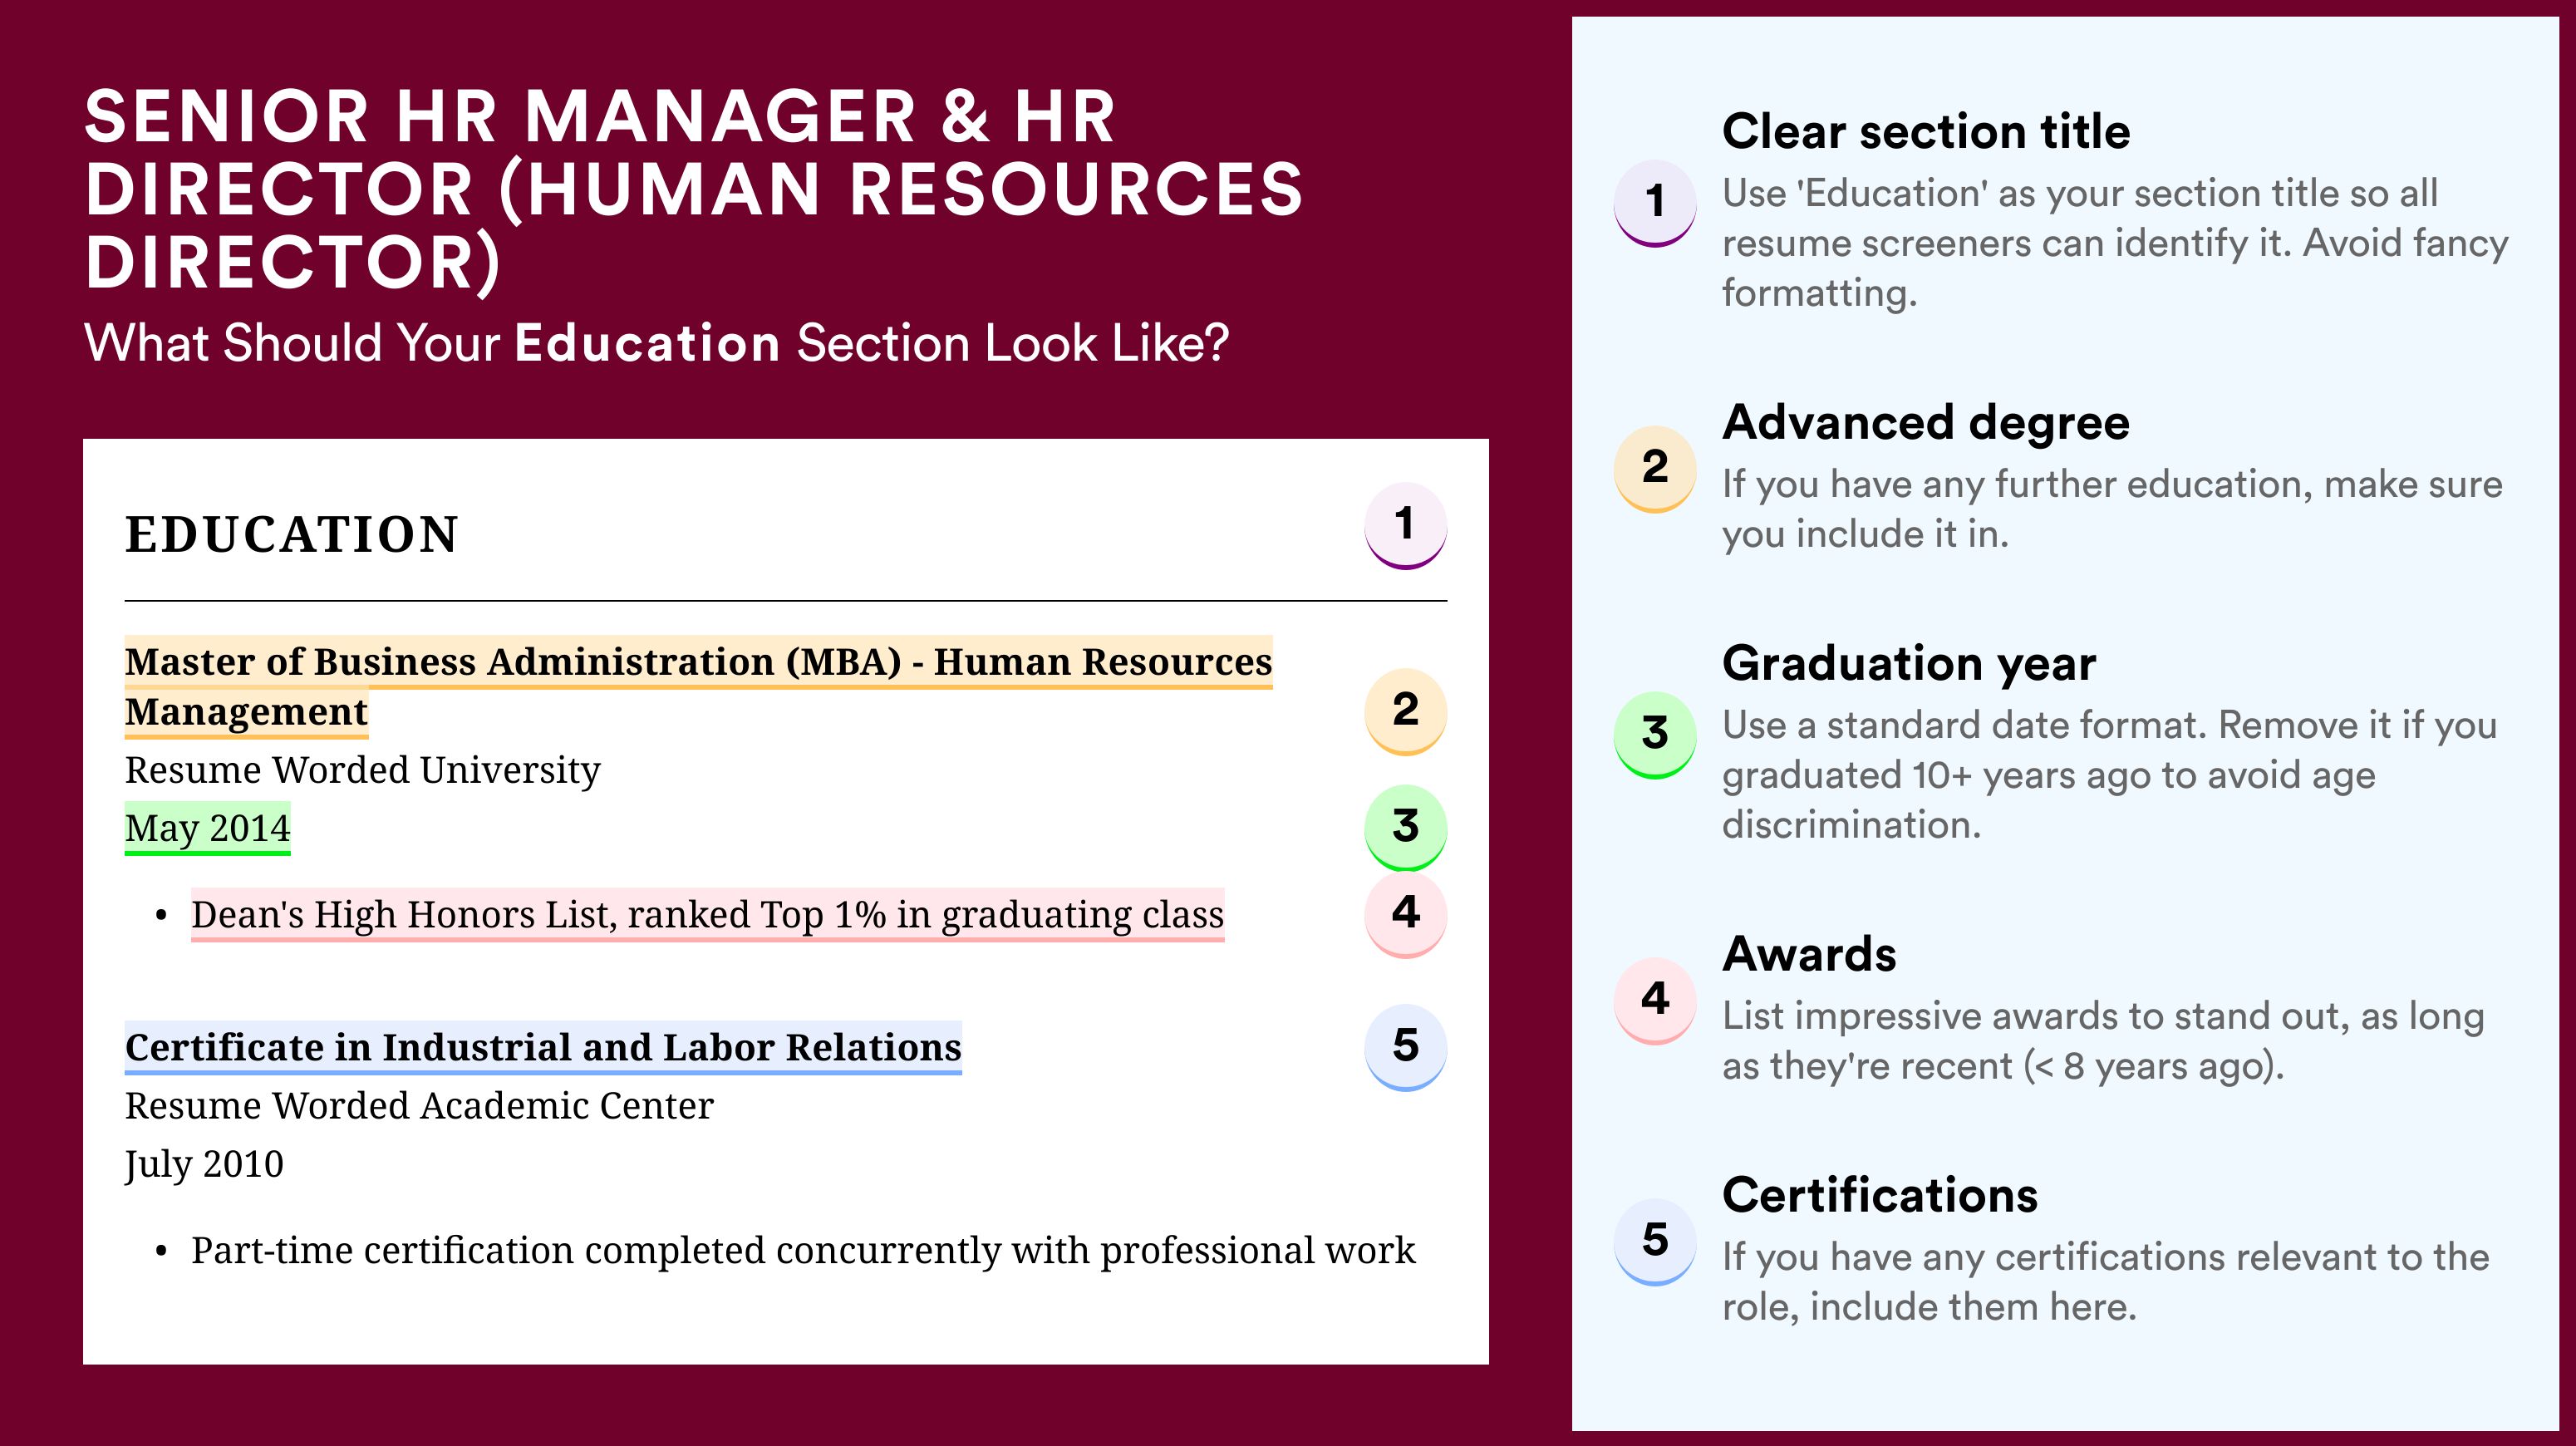 How To Write An Education Section - Senior HR Manager & HR Director (Human Resources Director) Roles